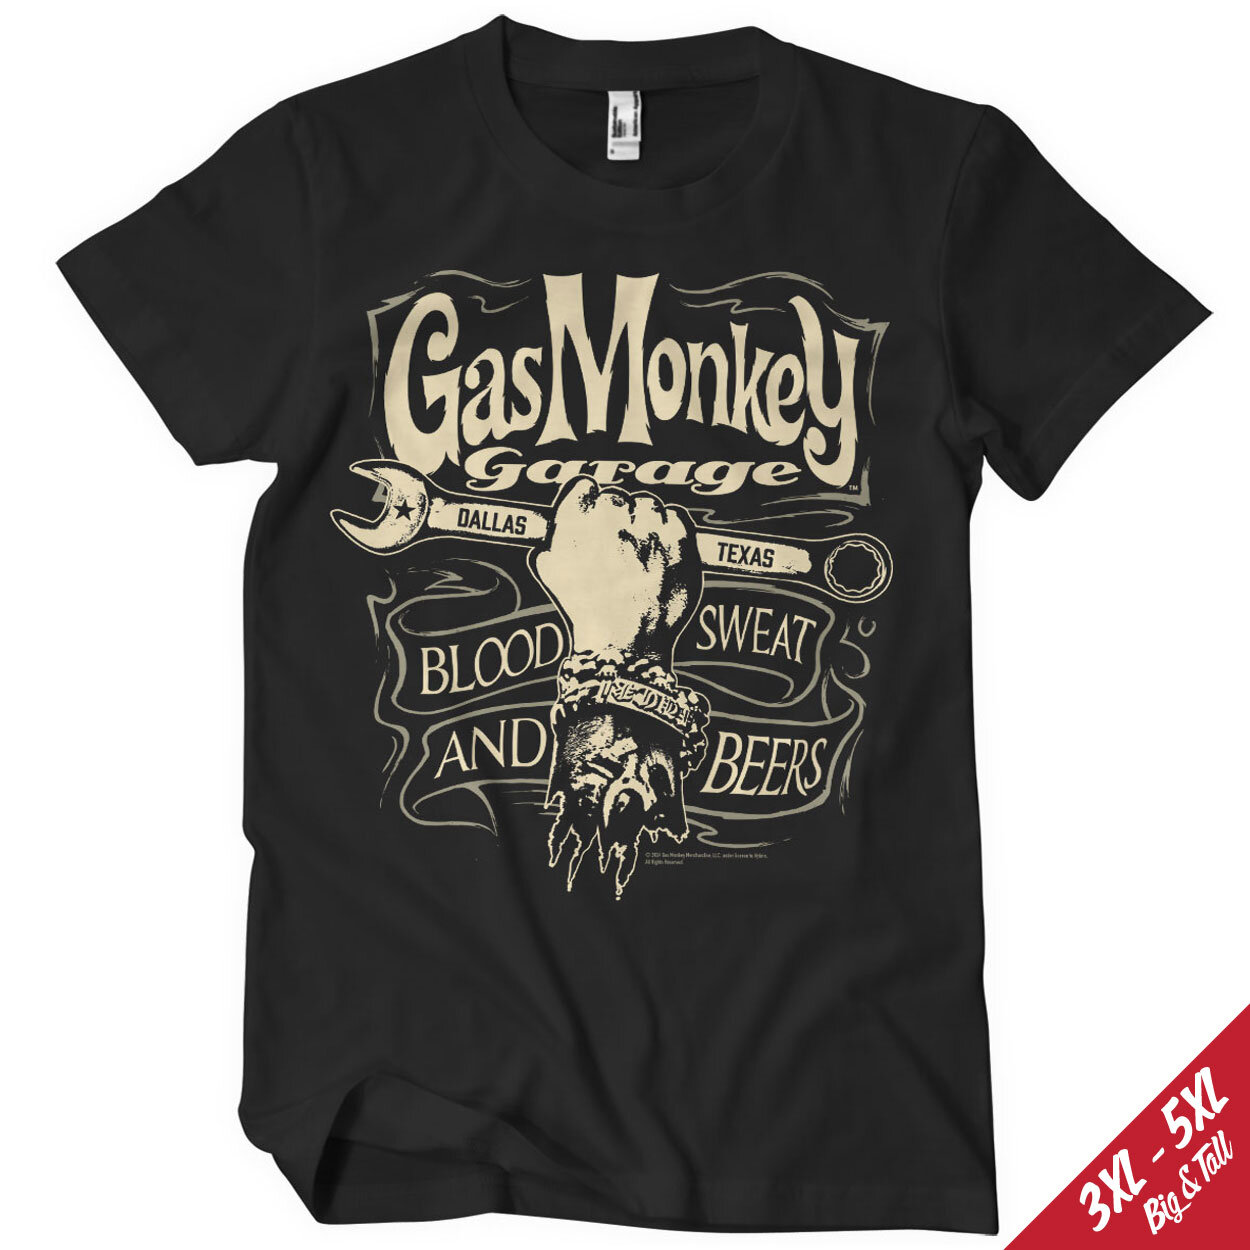 GMG Wrench Label Big & Tall T-Shirt